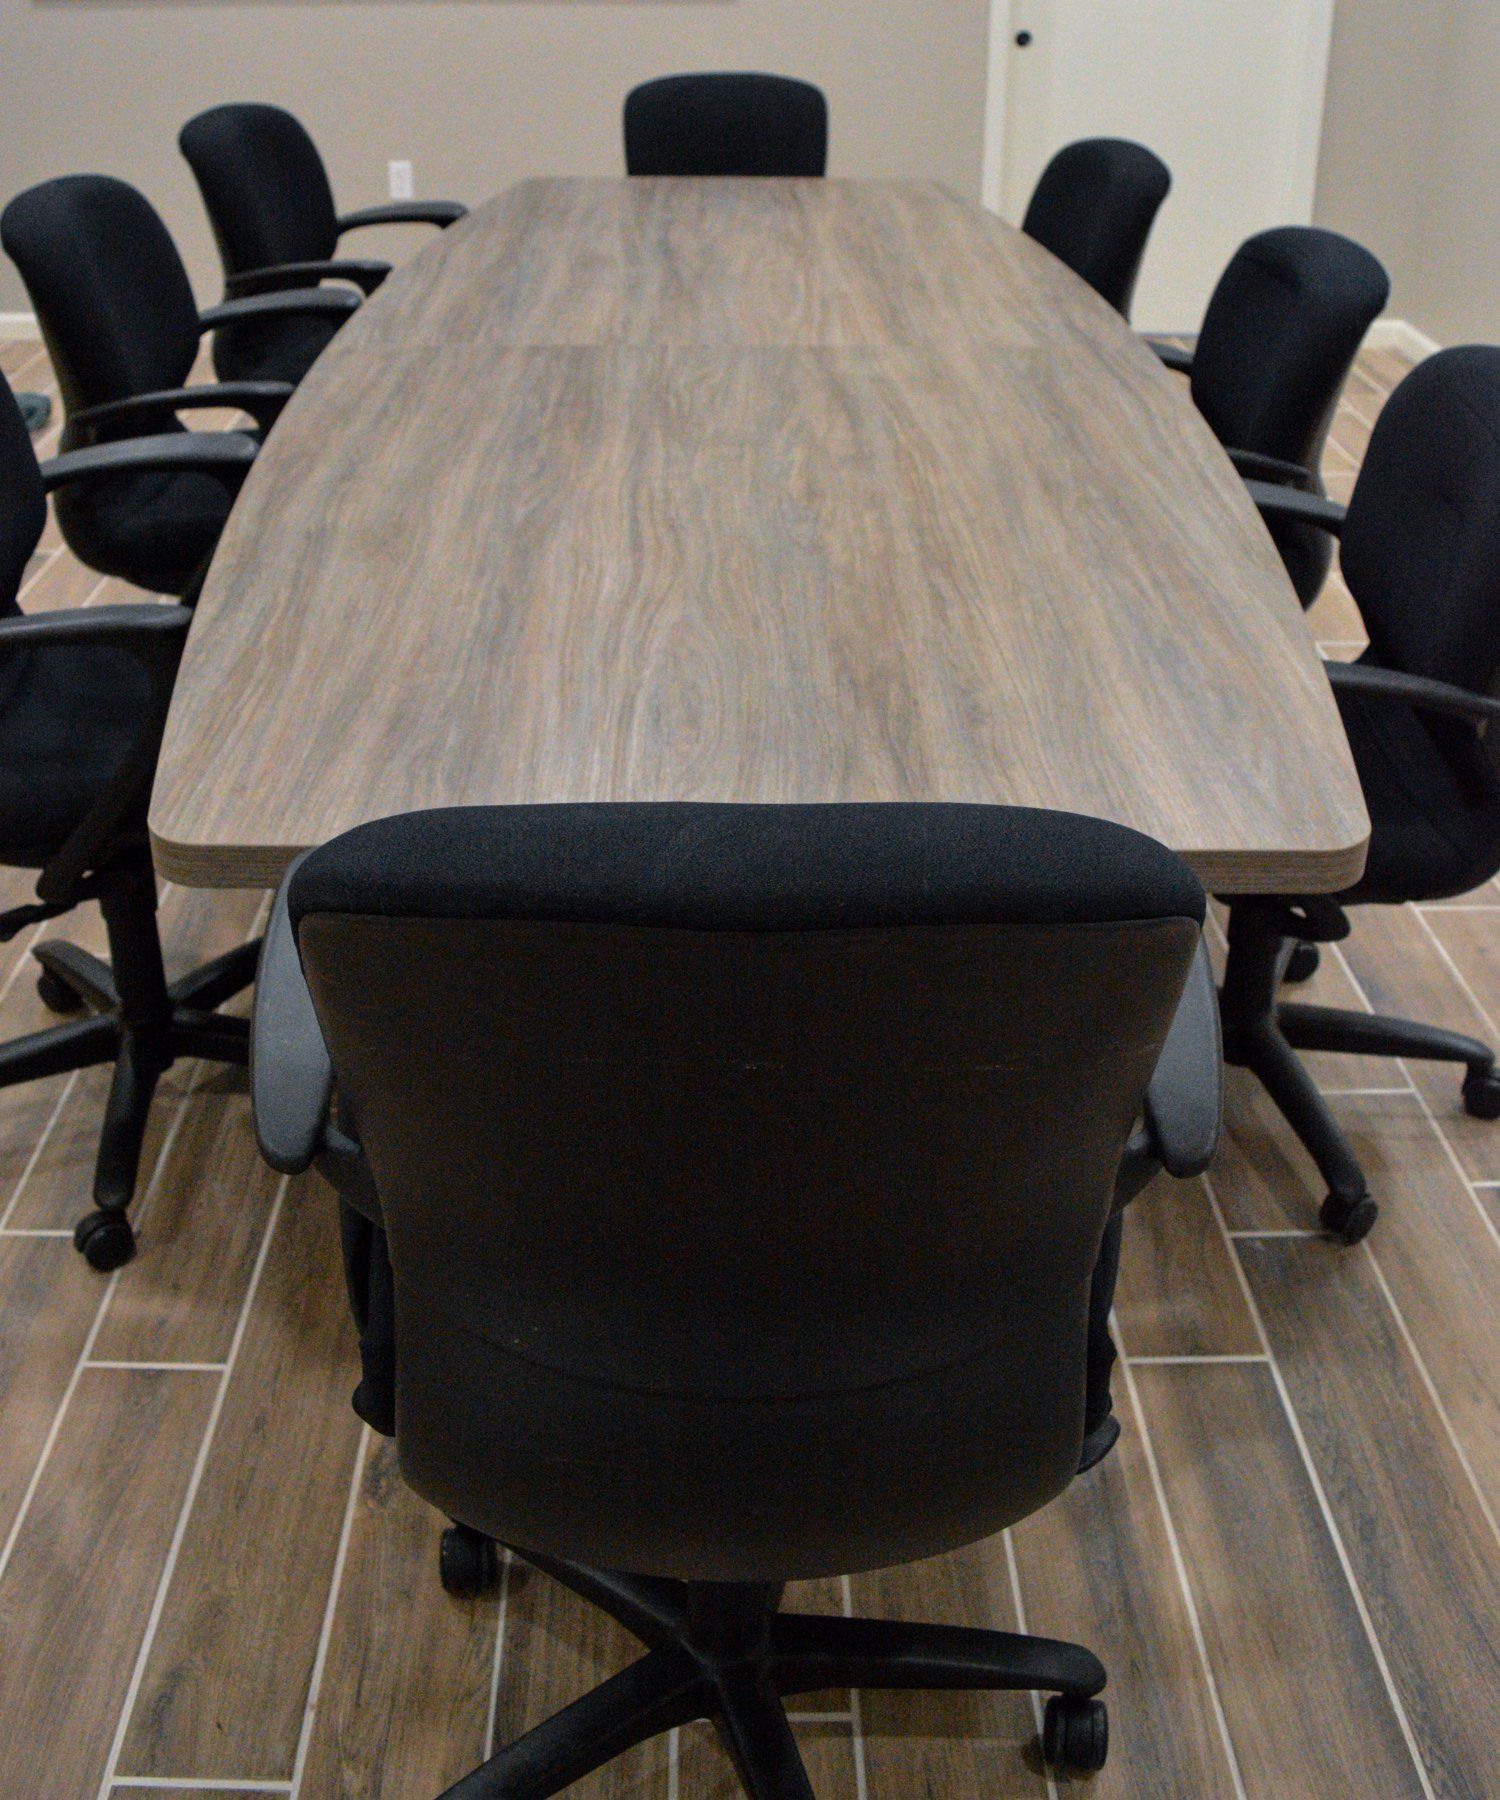 a long wooden conference table with black chairs around it